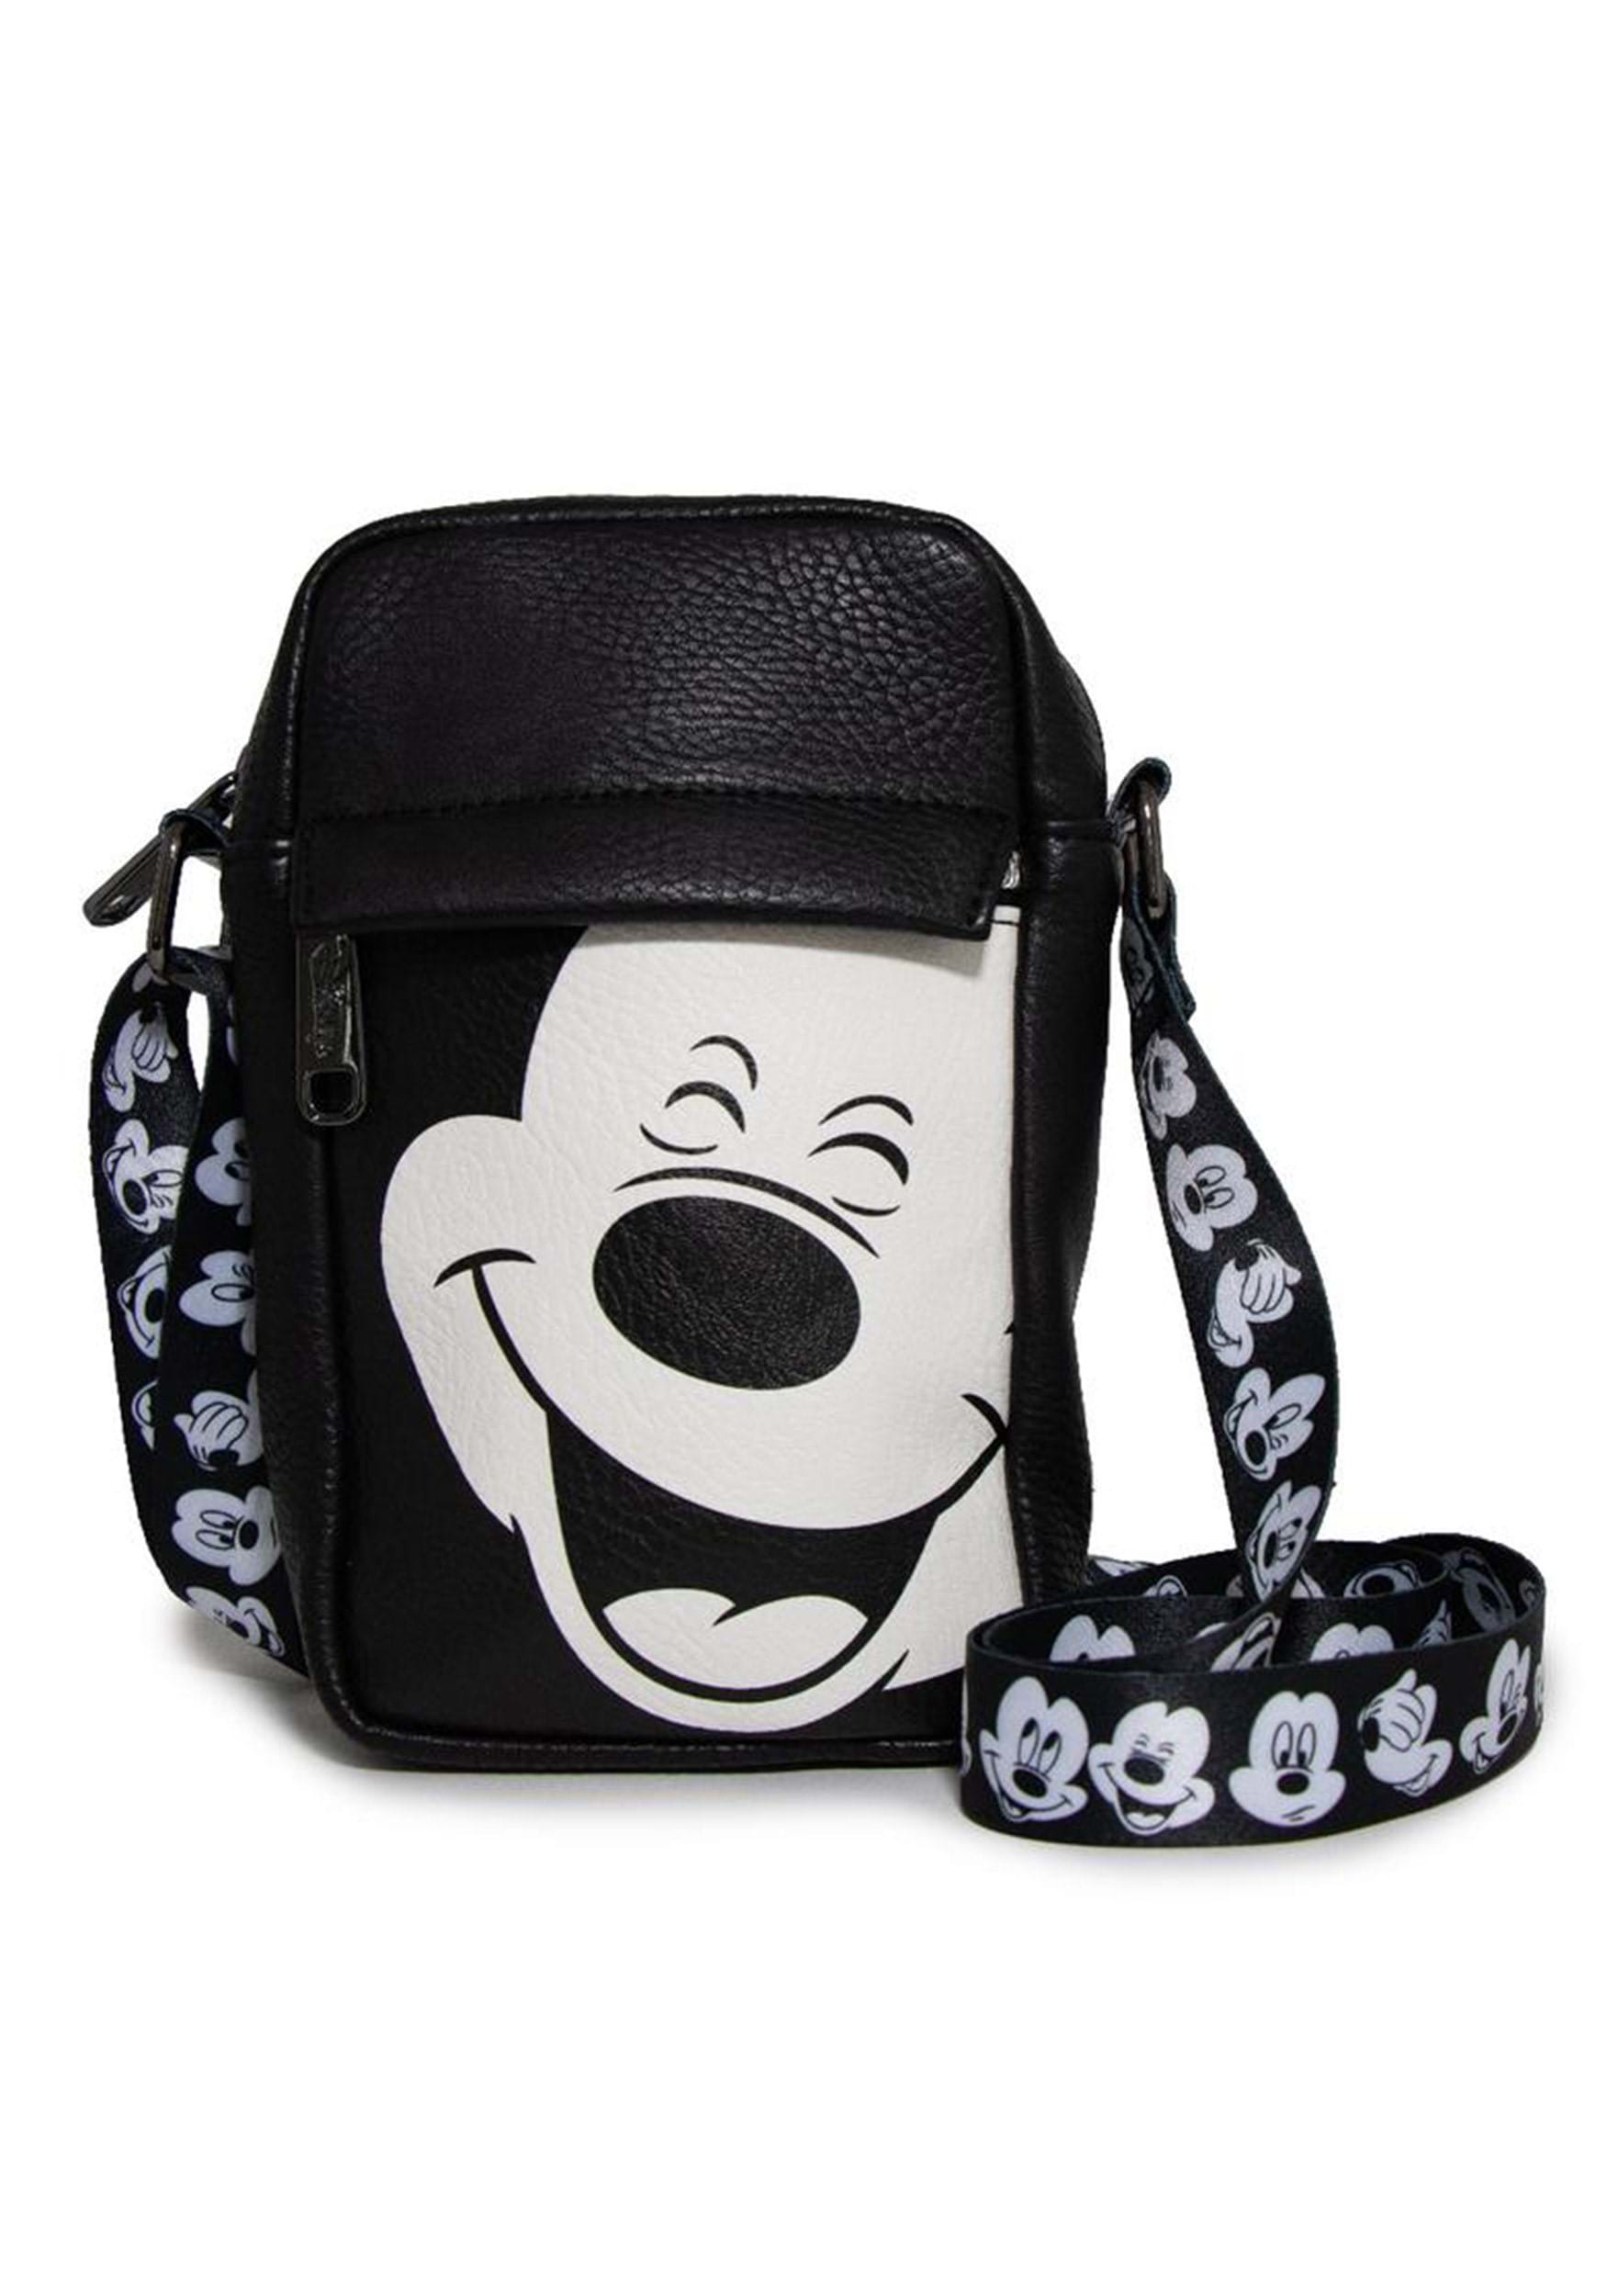 Embroidered Minnie / Mickey Mouse Backpack – Stitches & Sparkles